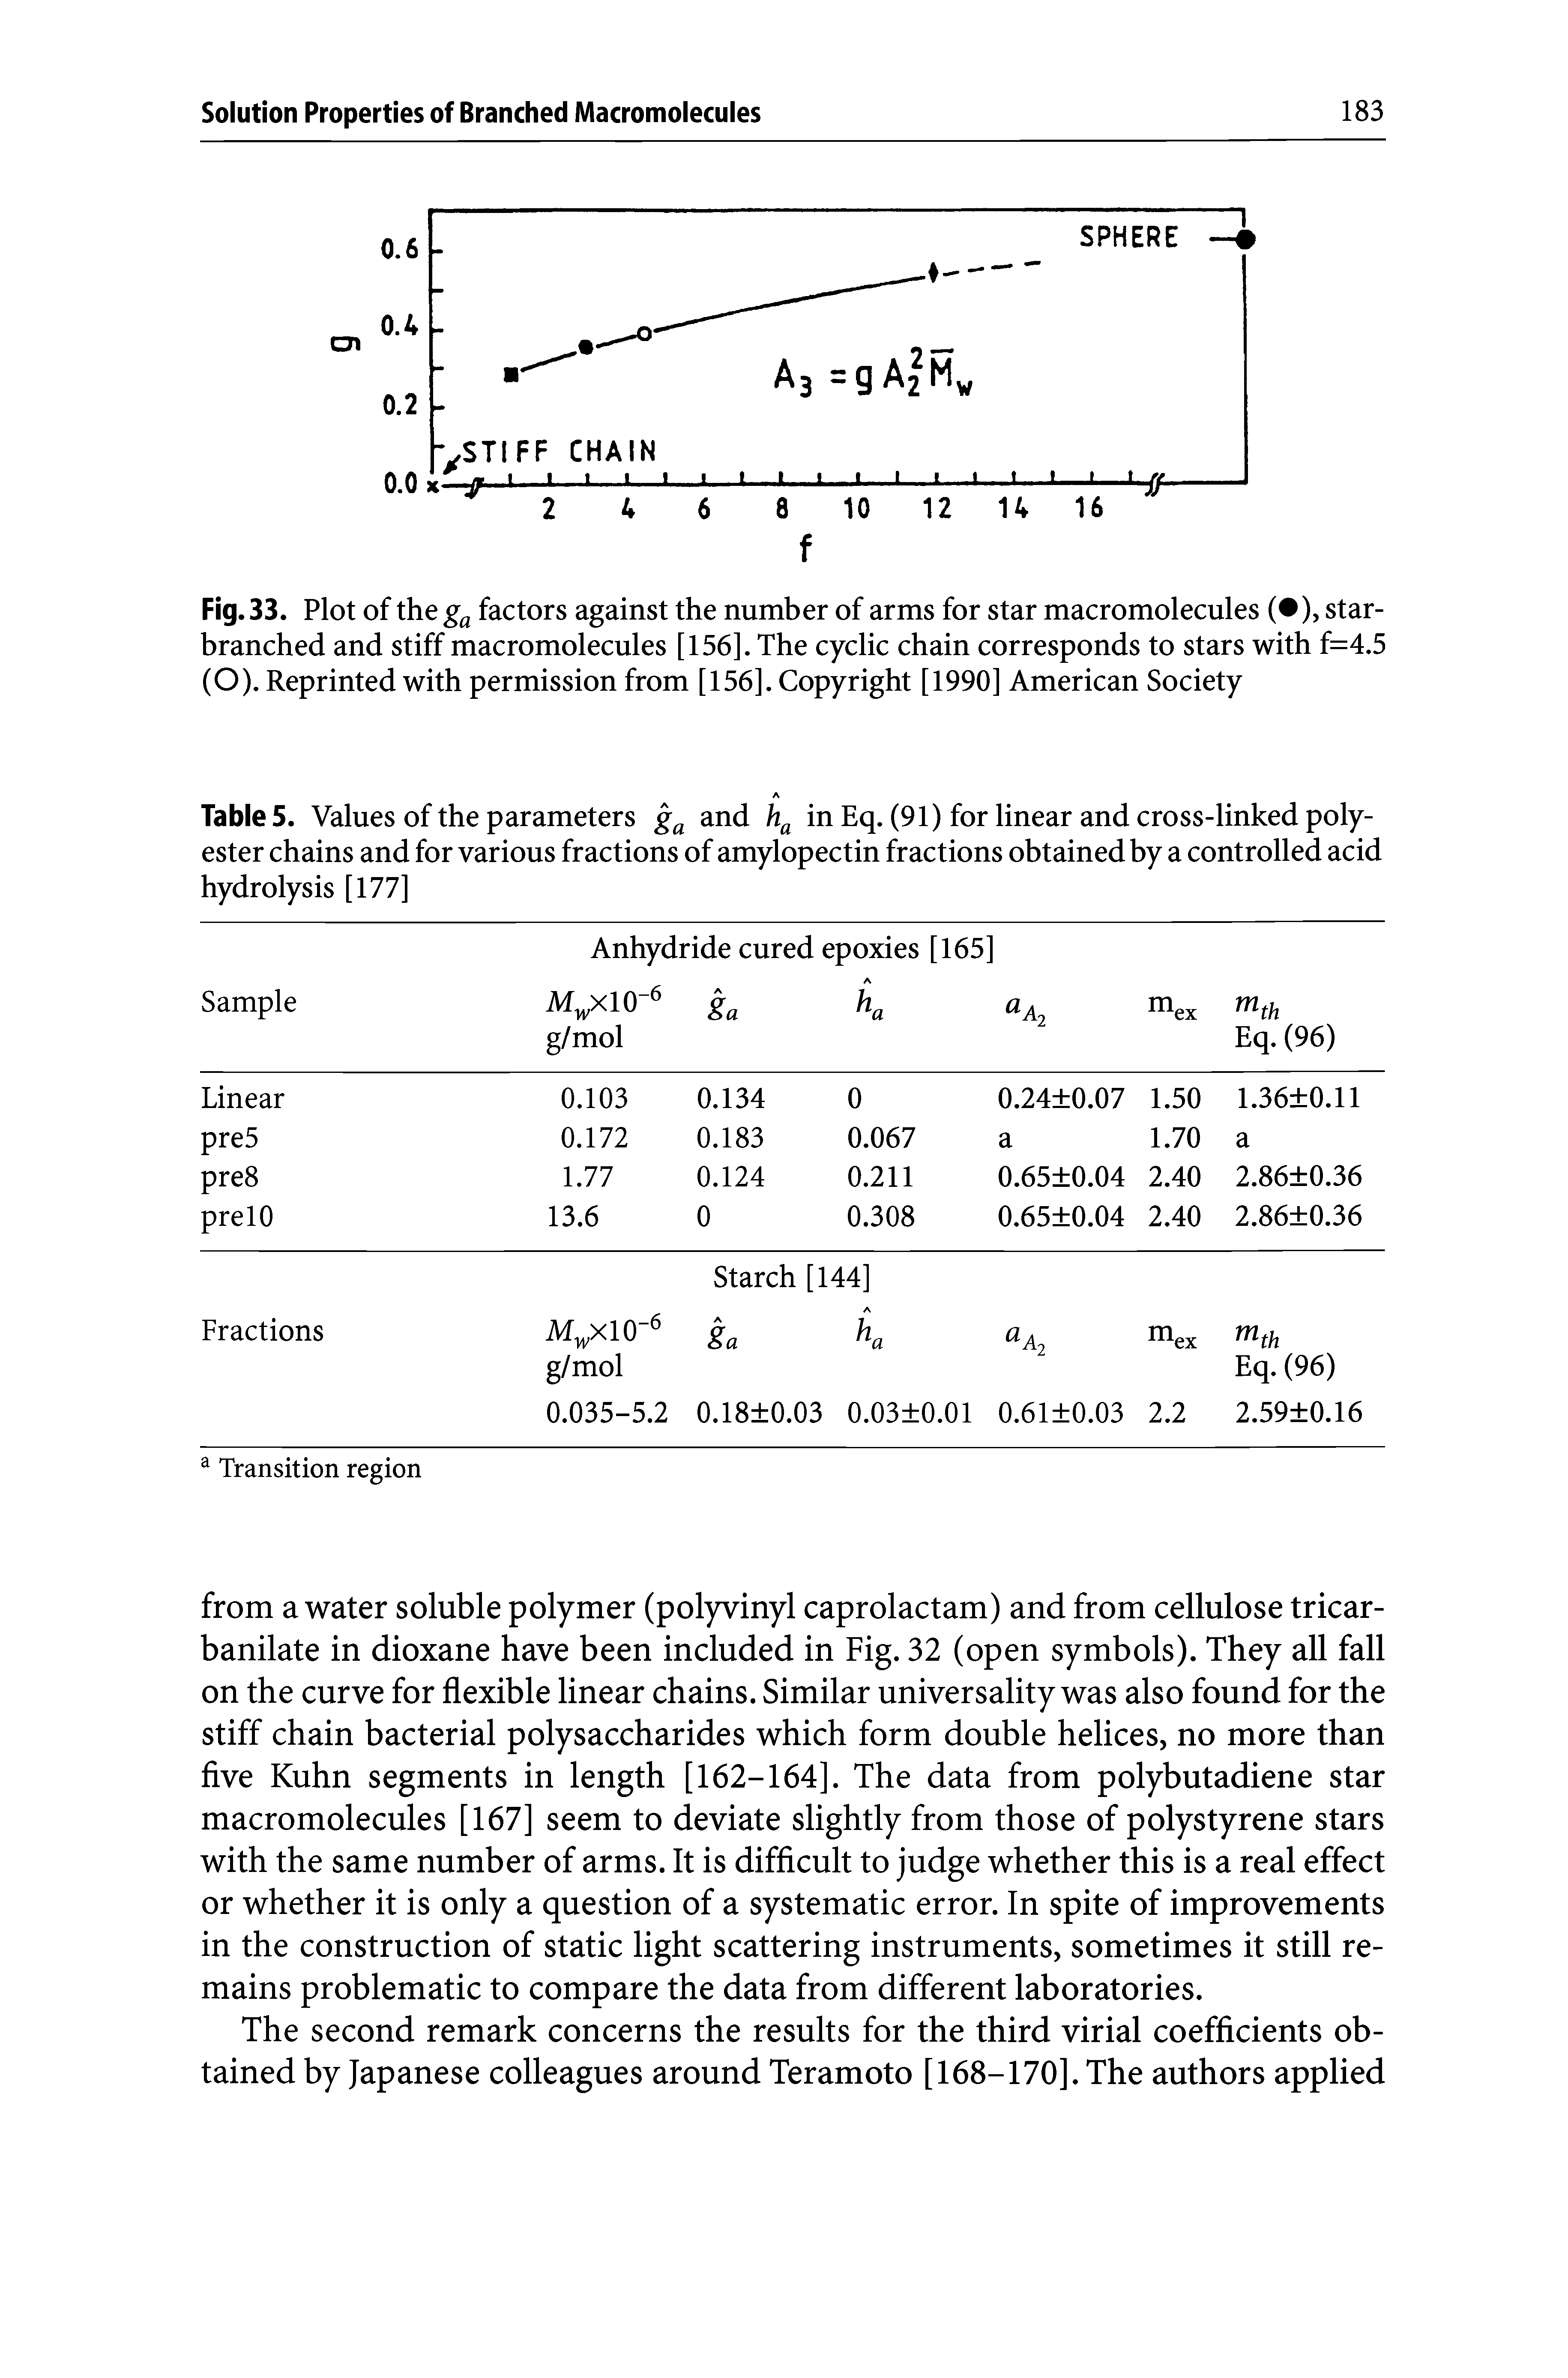 Table 5. Values of the parameters and in Eq. (91) for linear and cross-linked polyester chains and for various fractions of amylopectin fractions obtained by a controlled acid hydrolysis [177]...